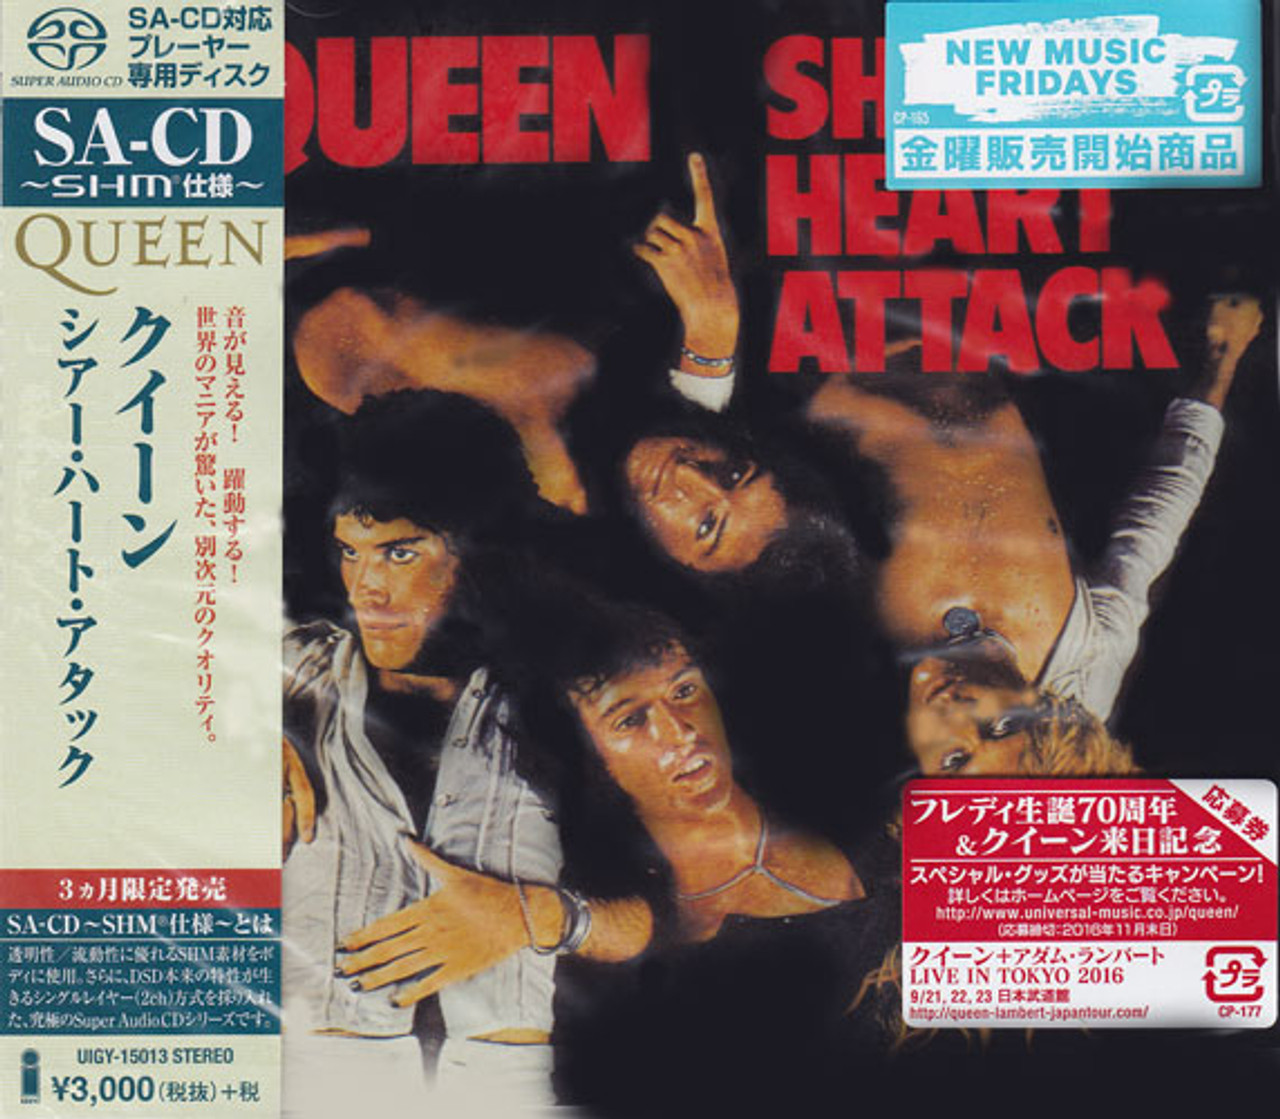 Stereo　Import　Attack　Heart　Single-Layer　Japanese　SHM-SACD　Queen　Sheer